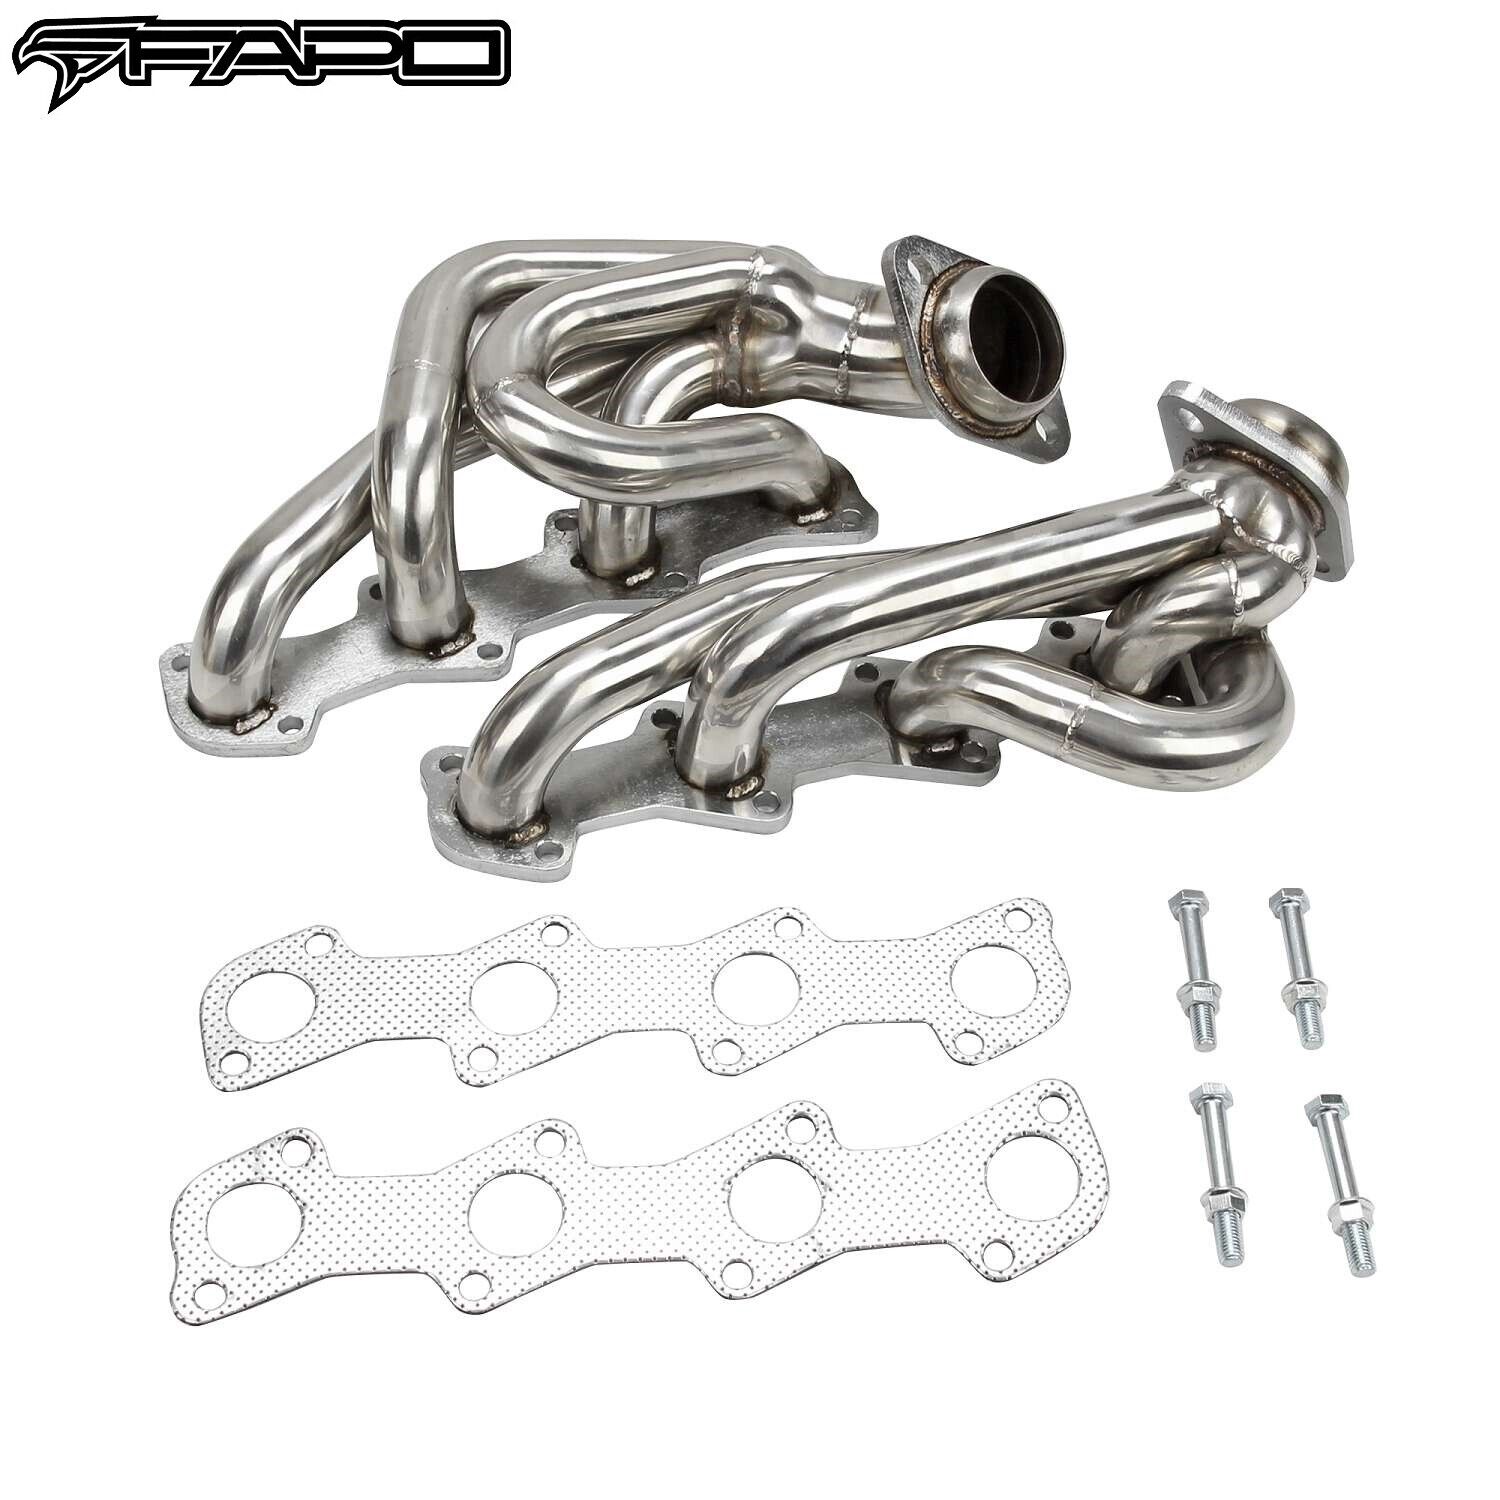 FAPO Shorty Headers for 97-03 Ford F150 XL XLT FX4 King Ranch Lariat 5.4L 330 V8